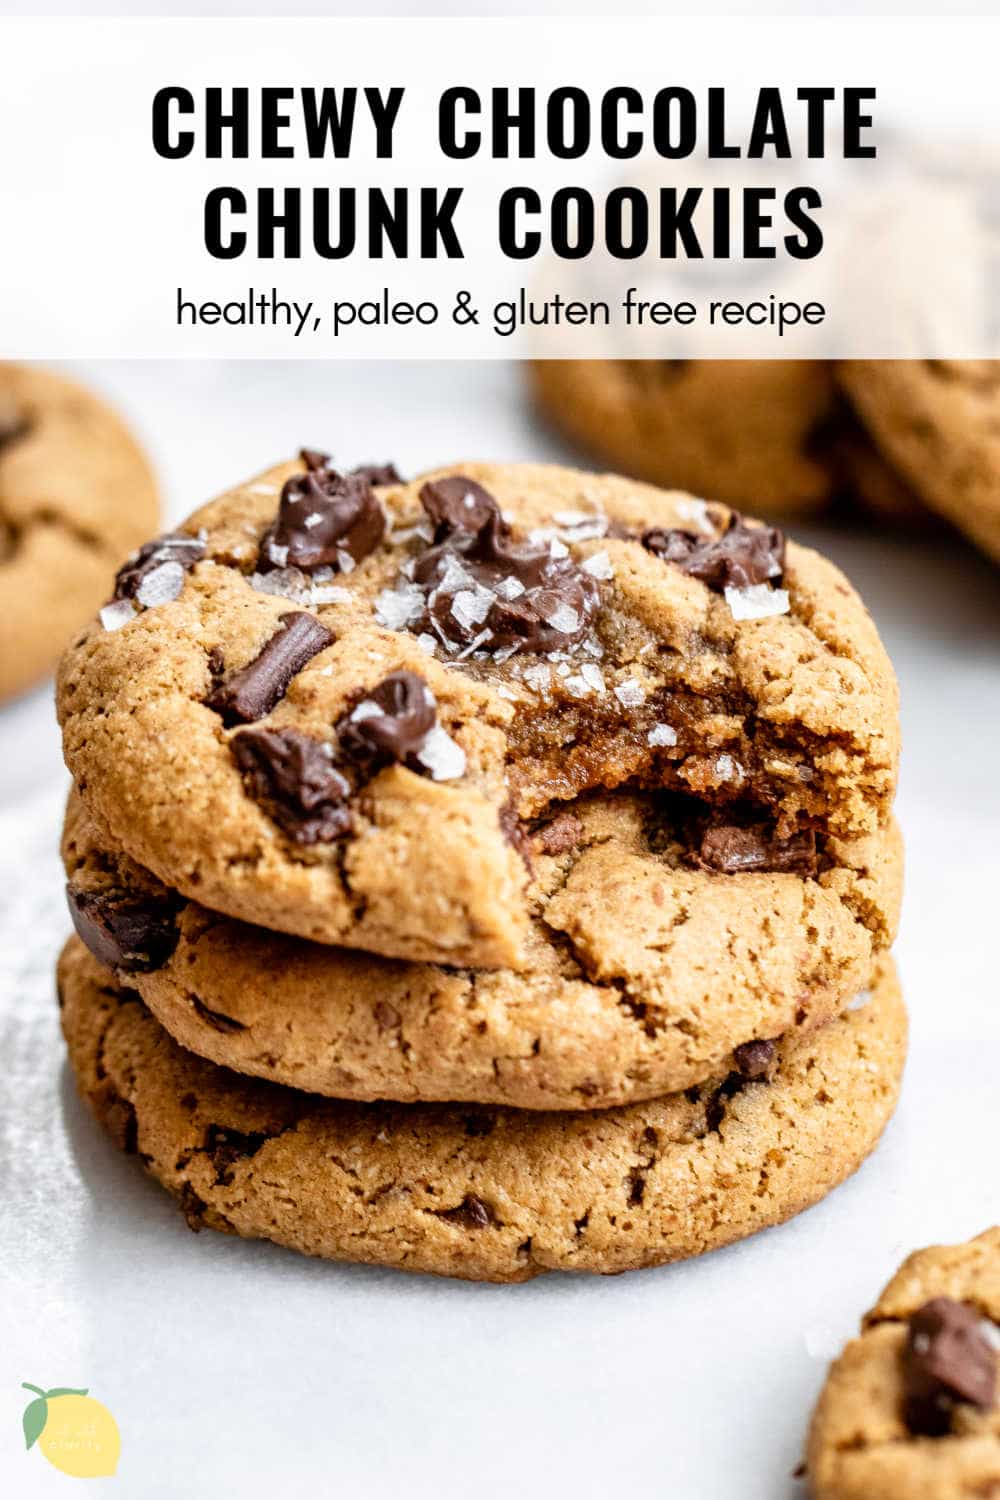 Chewy Paleo Chocolate Chunk Cookies | Eat With Clarity